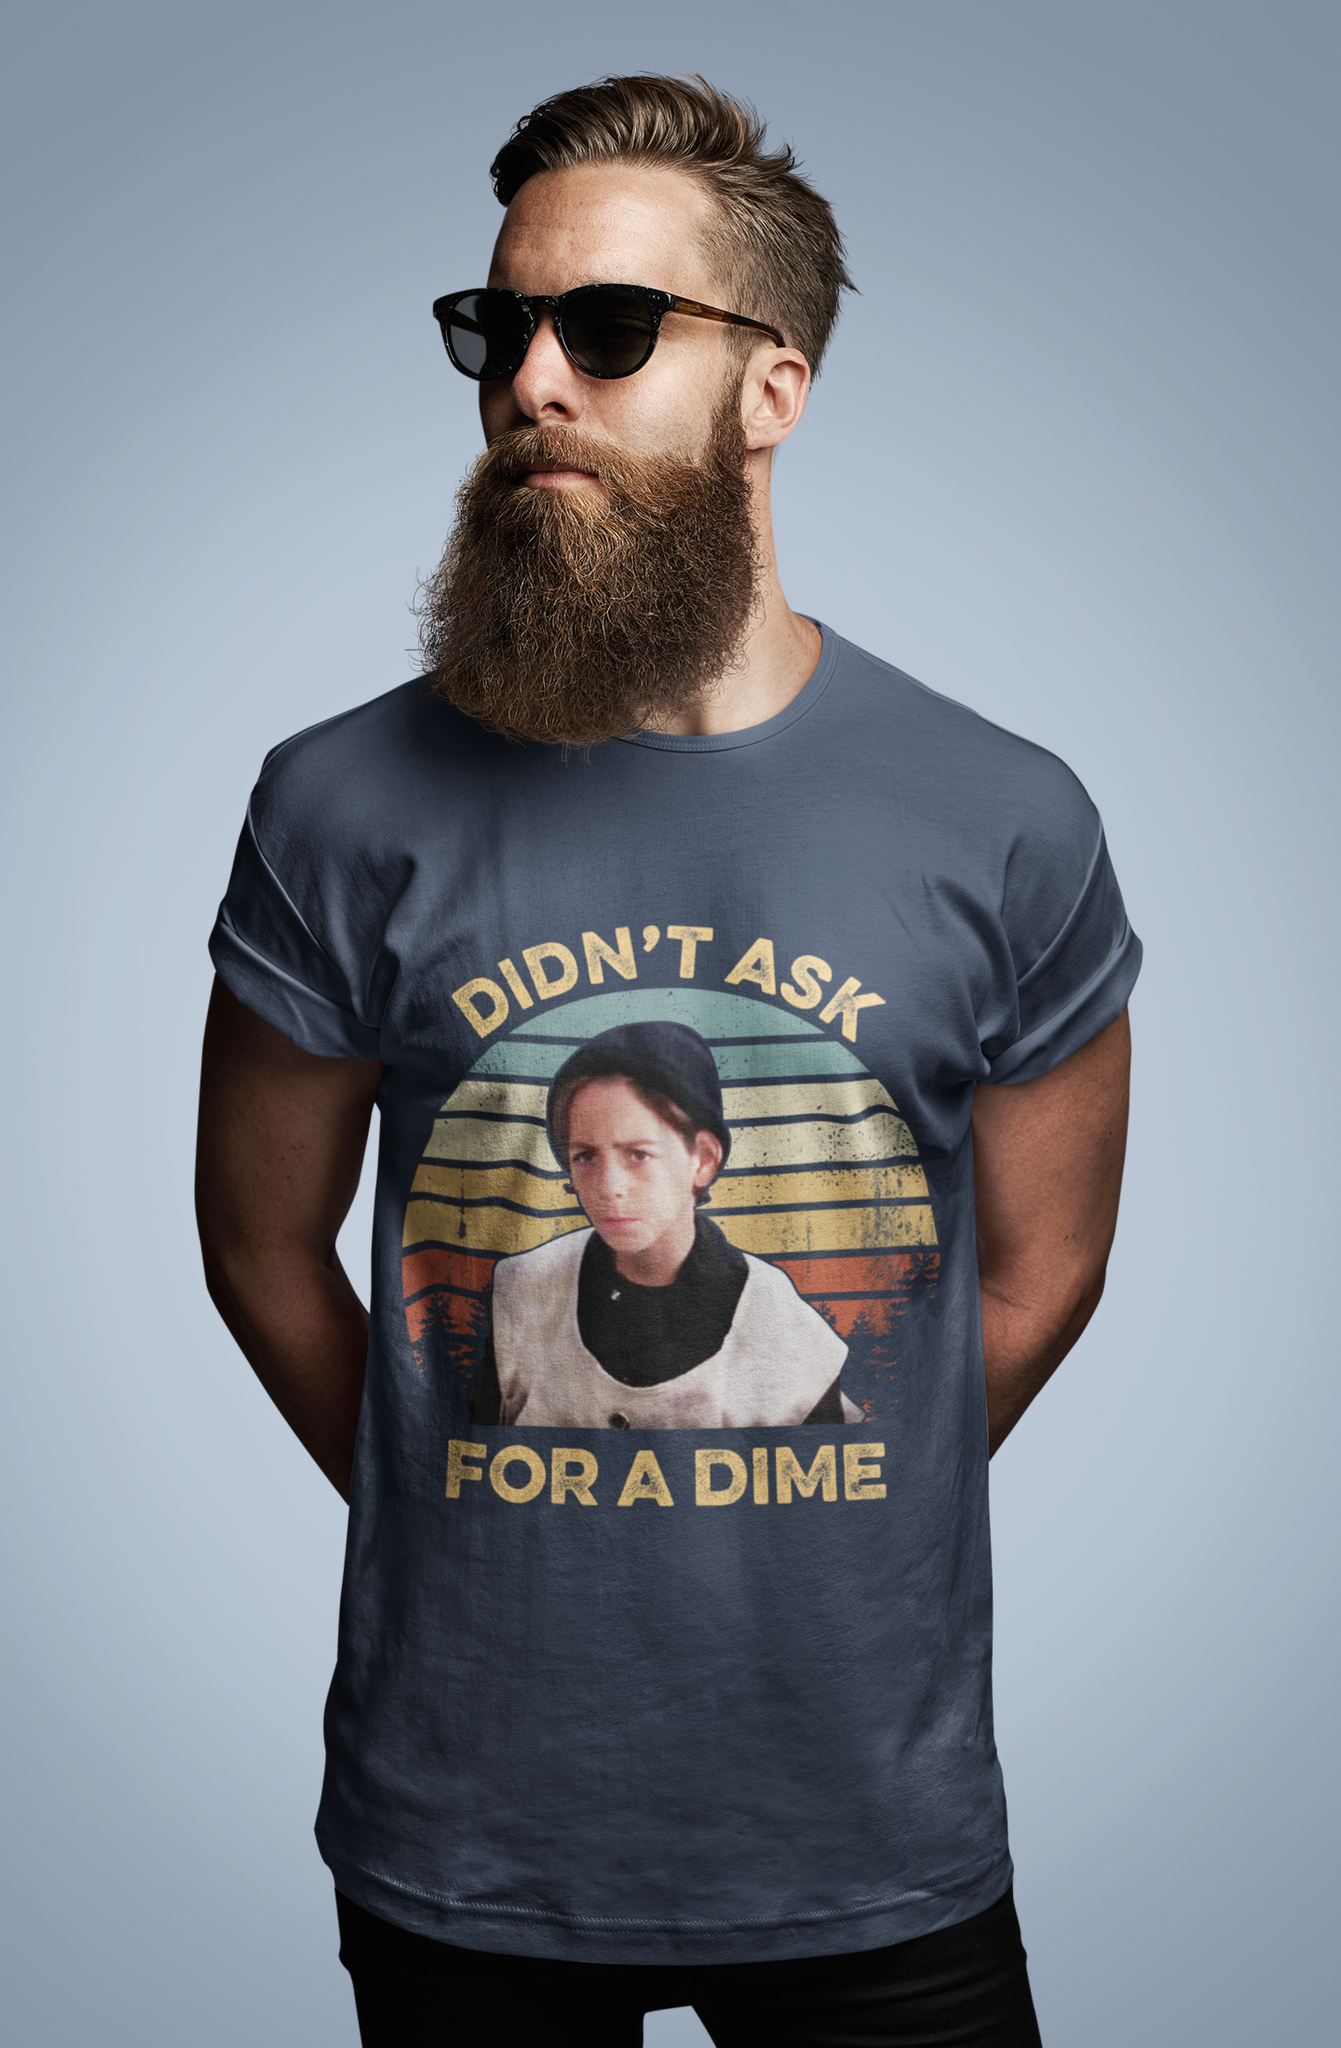 Better Off Dead Comedy Film T Shirt, Johnny Gasparini T Shirt, Didnt Ask For A Dime Tshirt